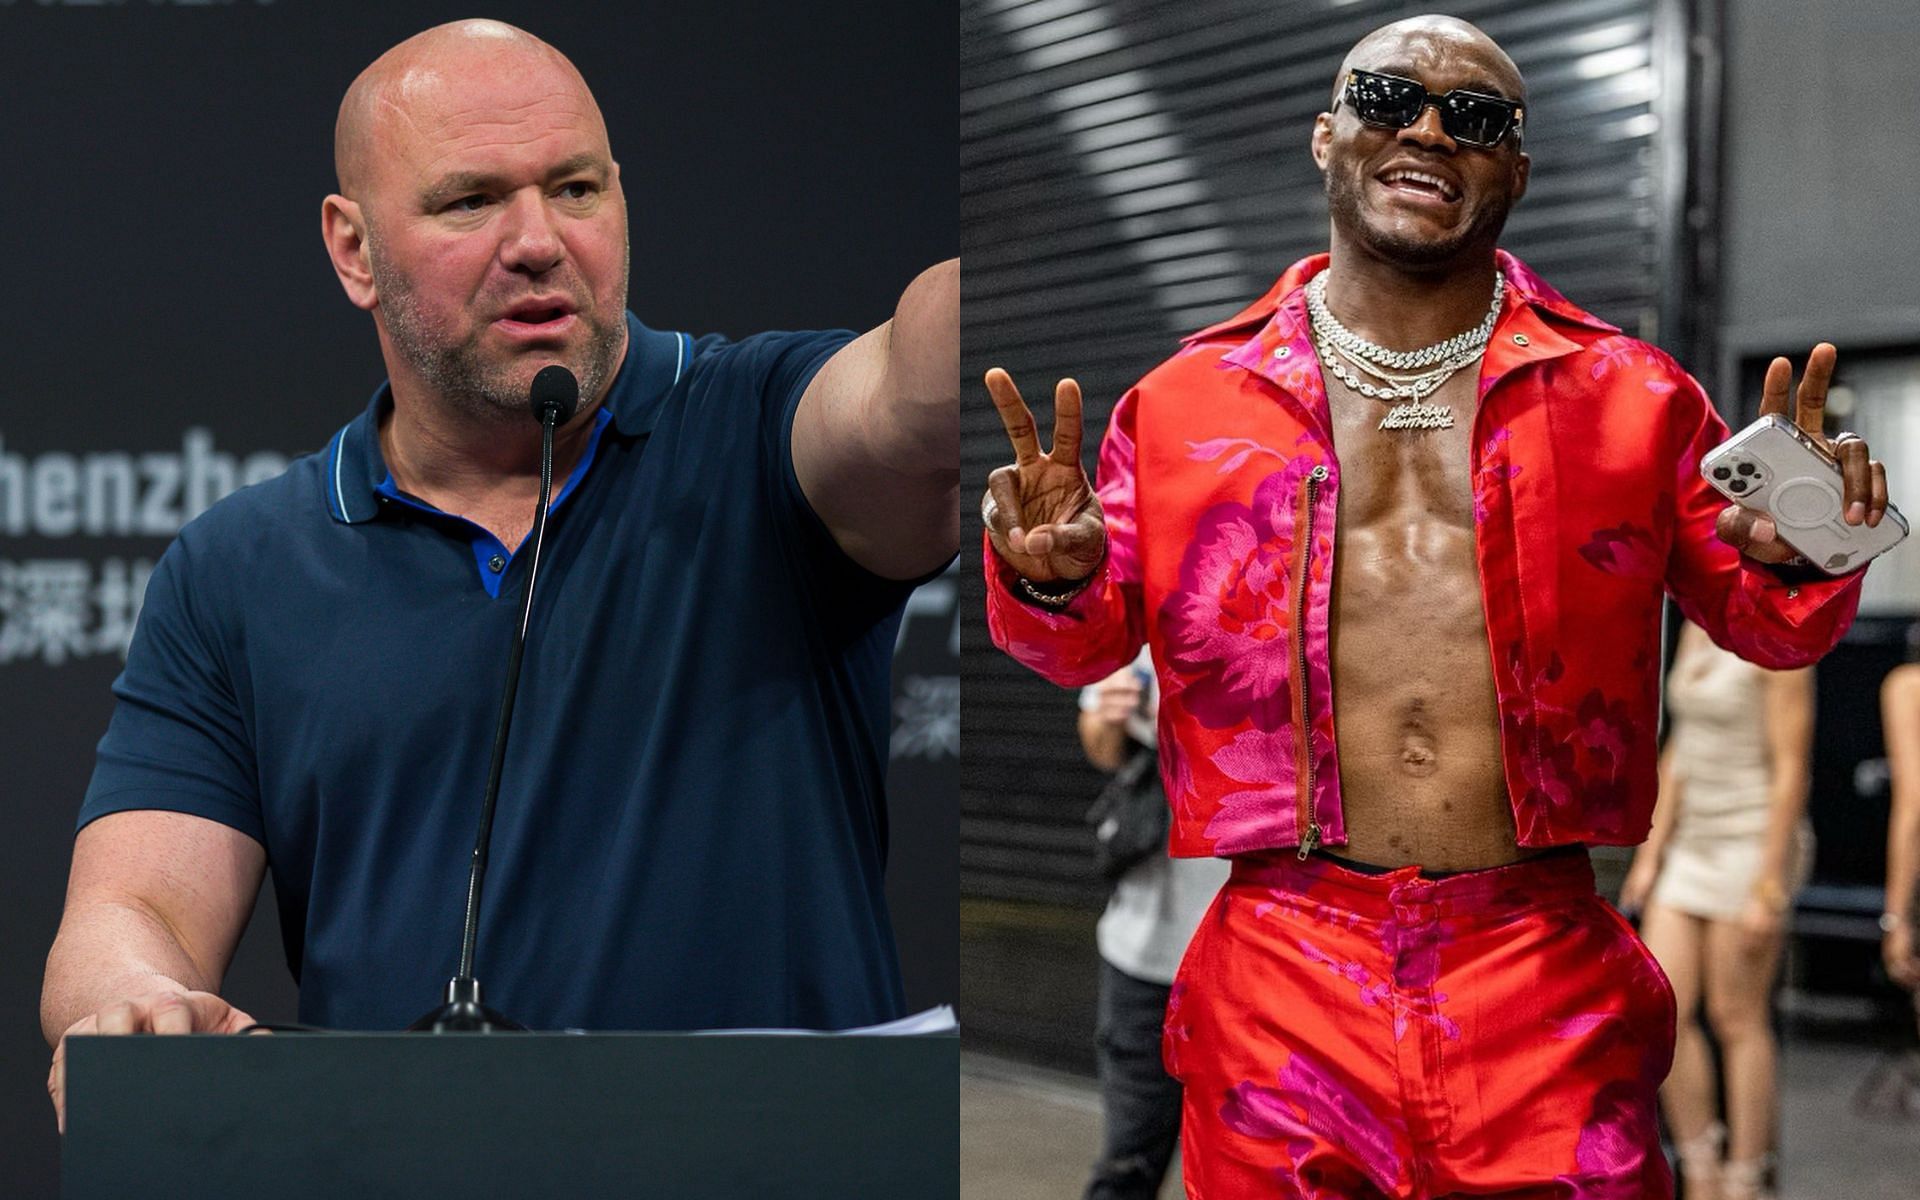 Dana White (left) and Kamaru Usman (right) [Images courtesy of Getty and @usman84kg Instagram]